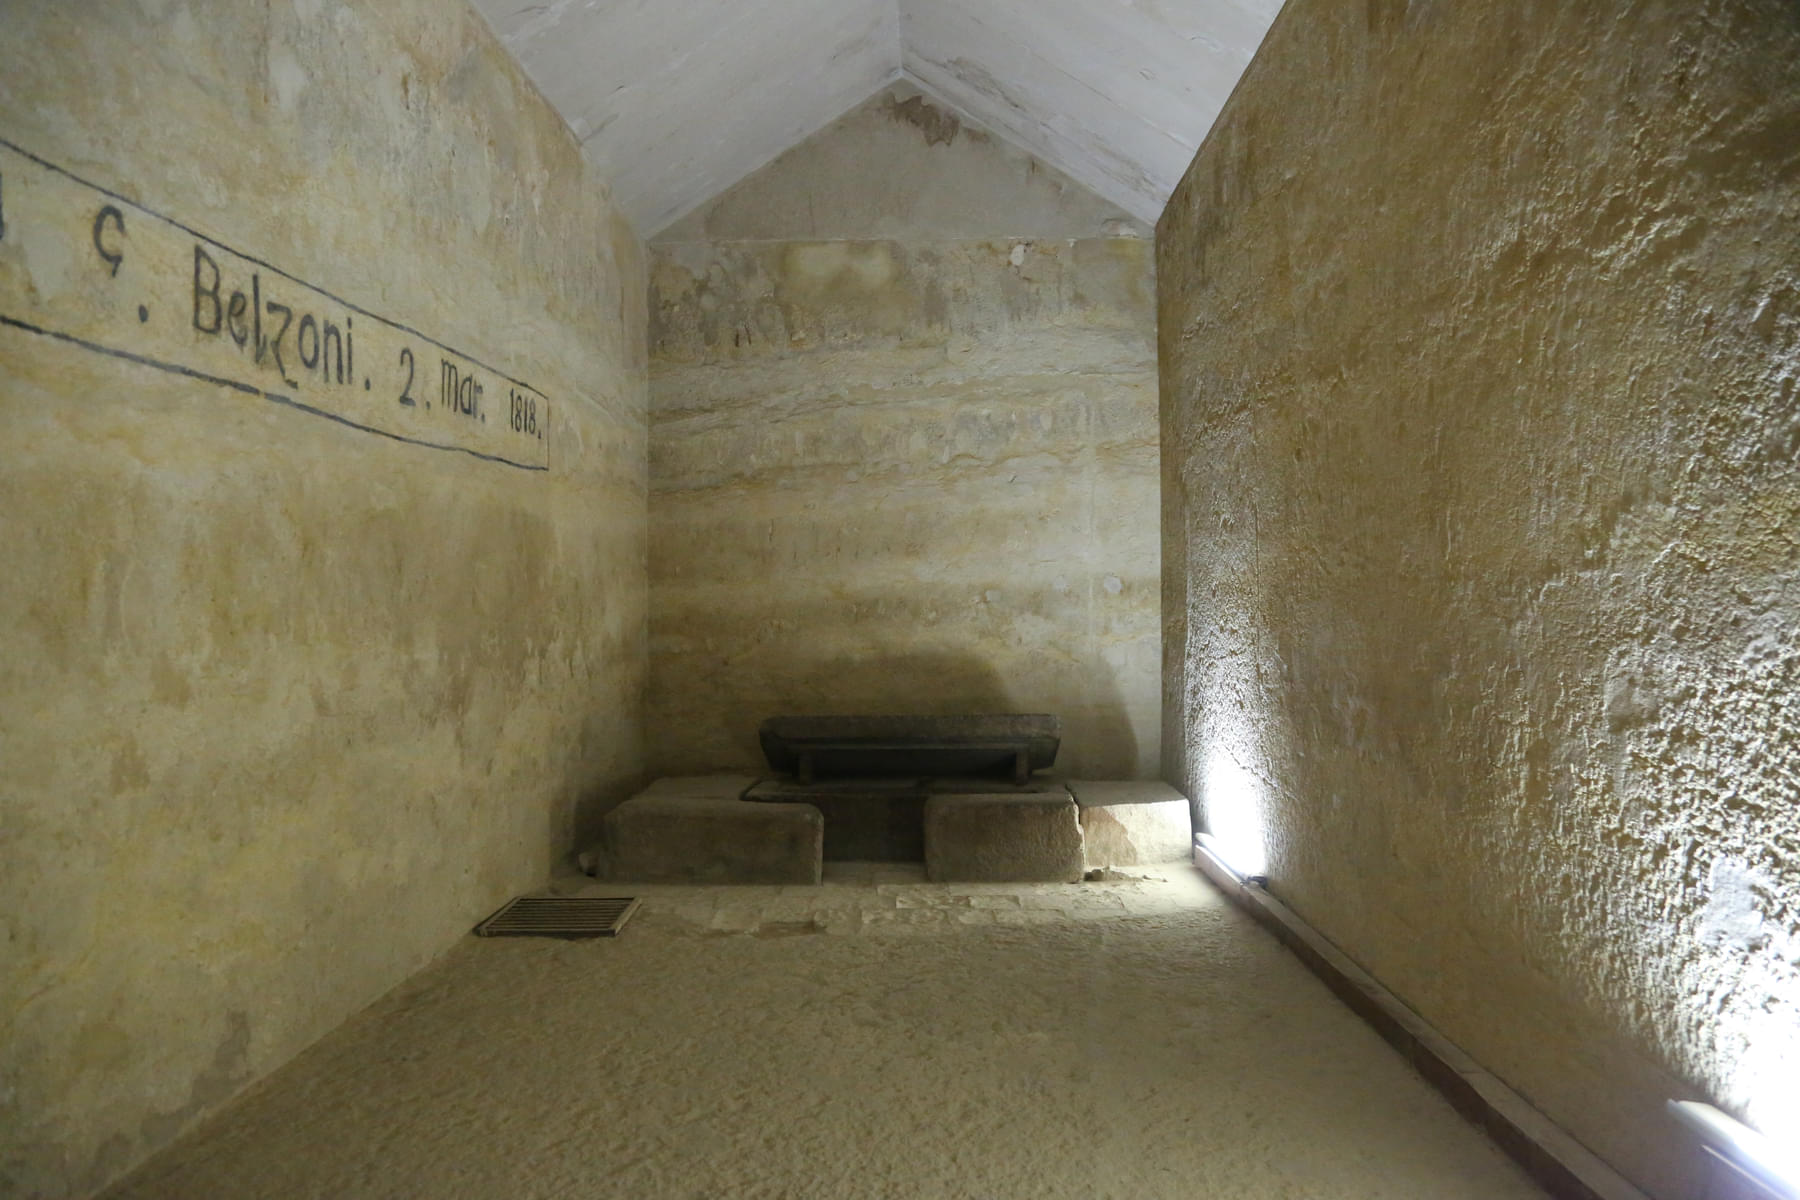 Stroll through the chambers and passages in the pyramids